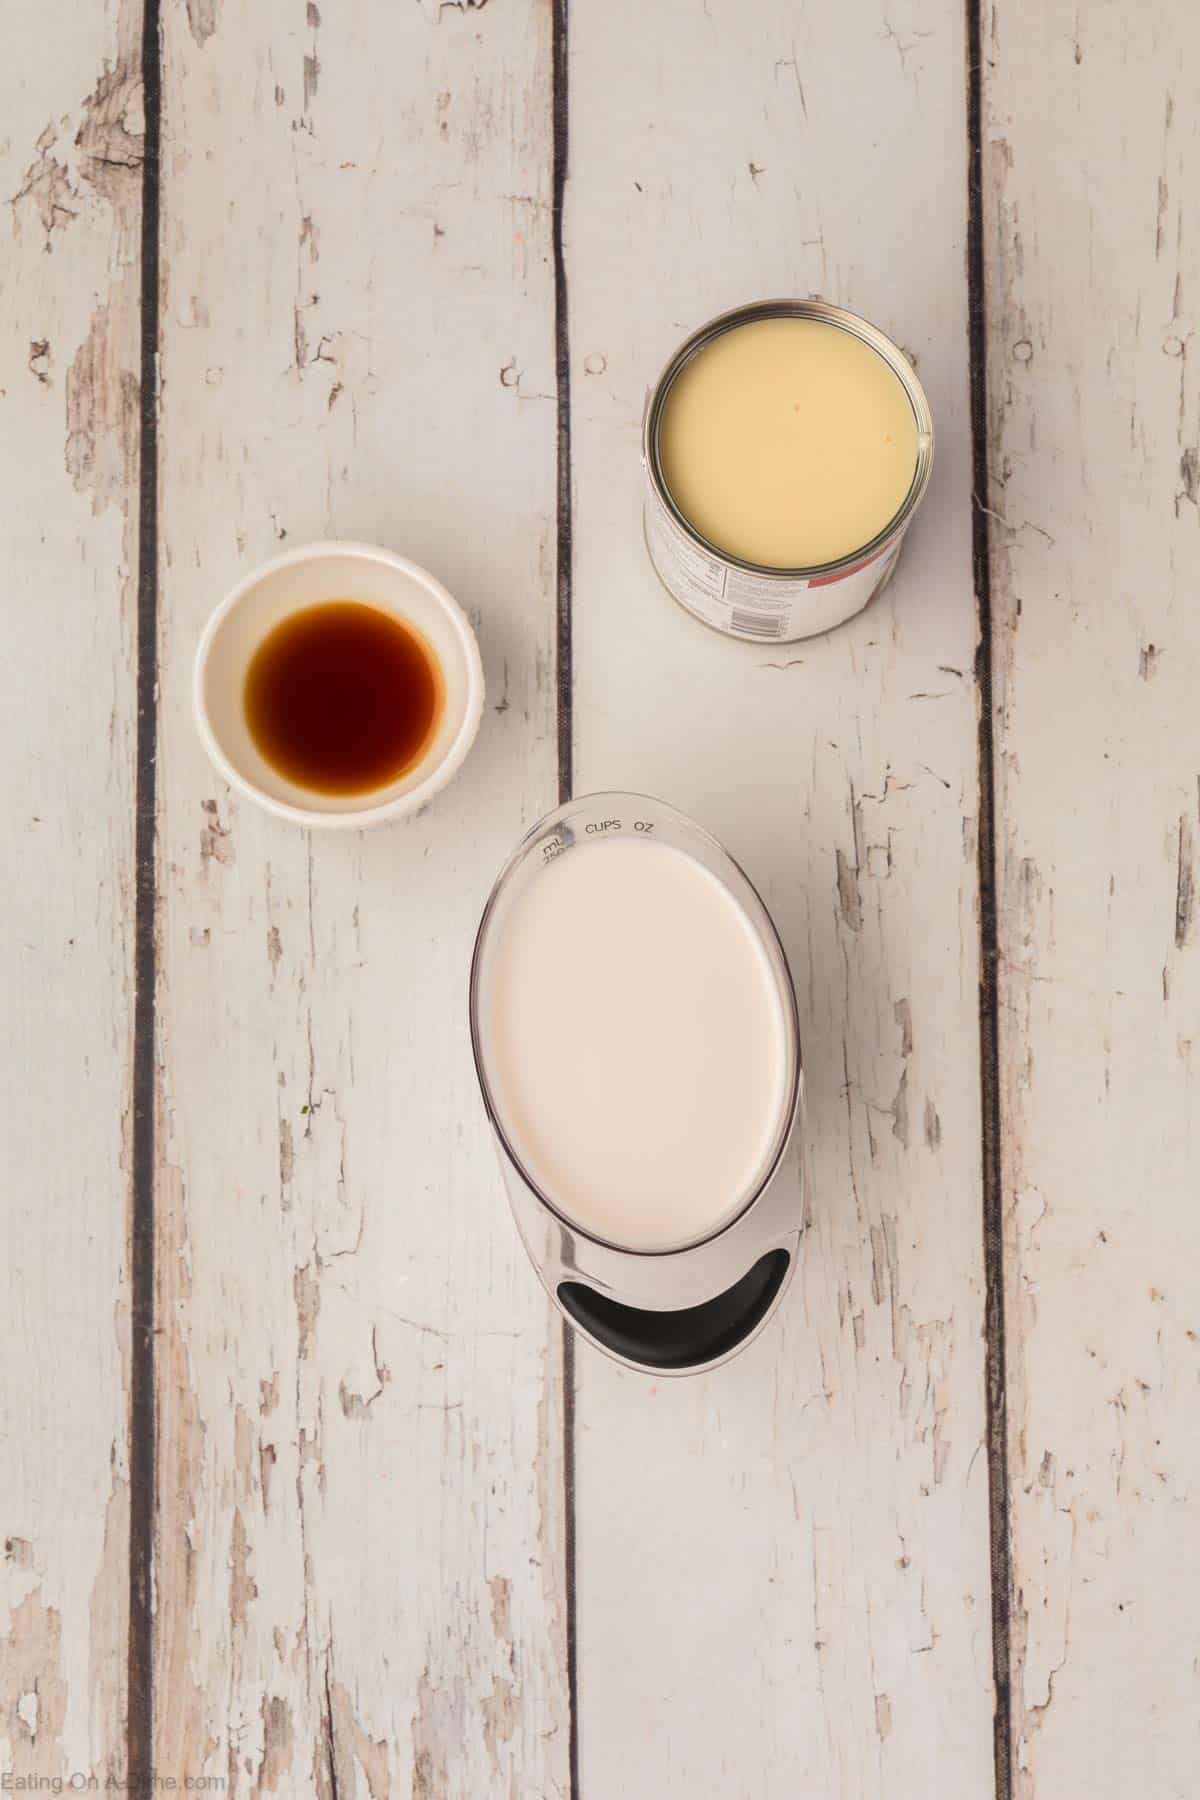 A top-down view of three ingredients on a white rustic wooden surface, perfect for homemade coffee creamer. There is a small white bowl containing vanilla extract, an open can of sweetened condensed milk, and a measuring cup filled with cream.